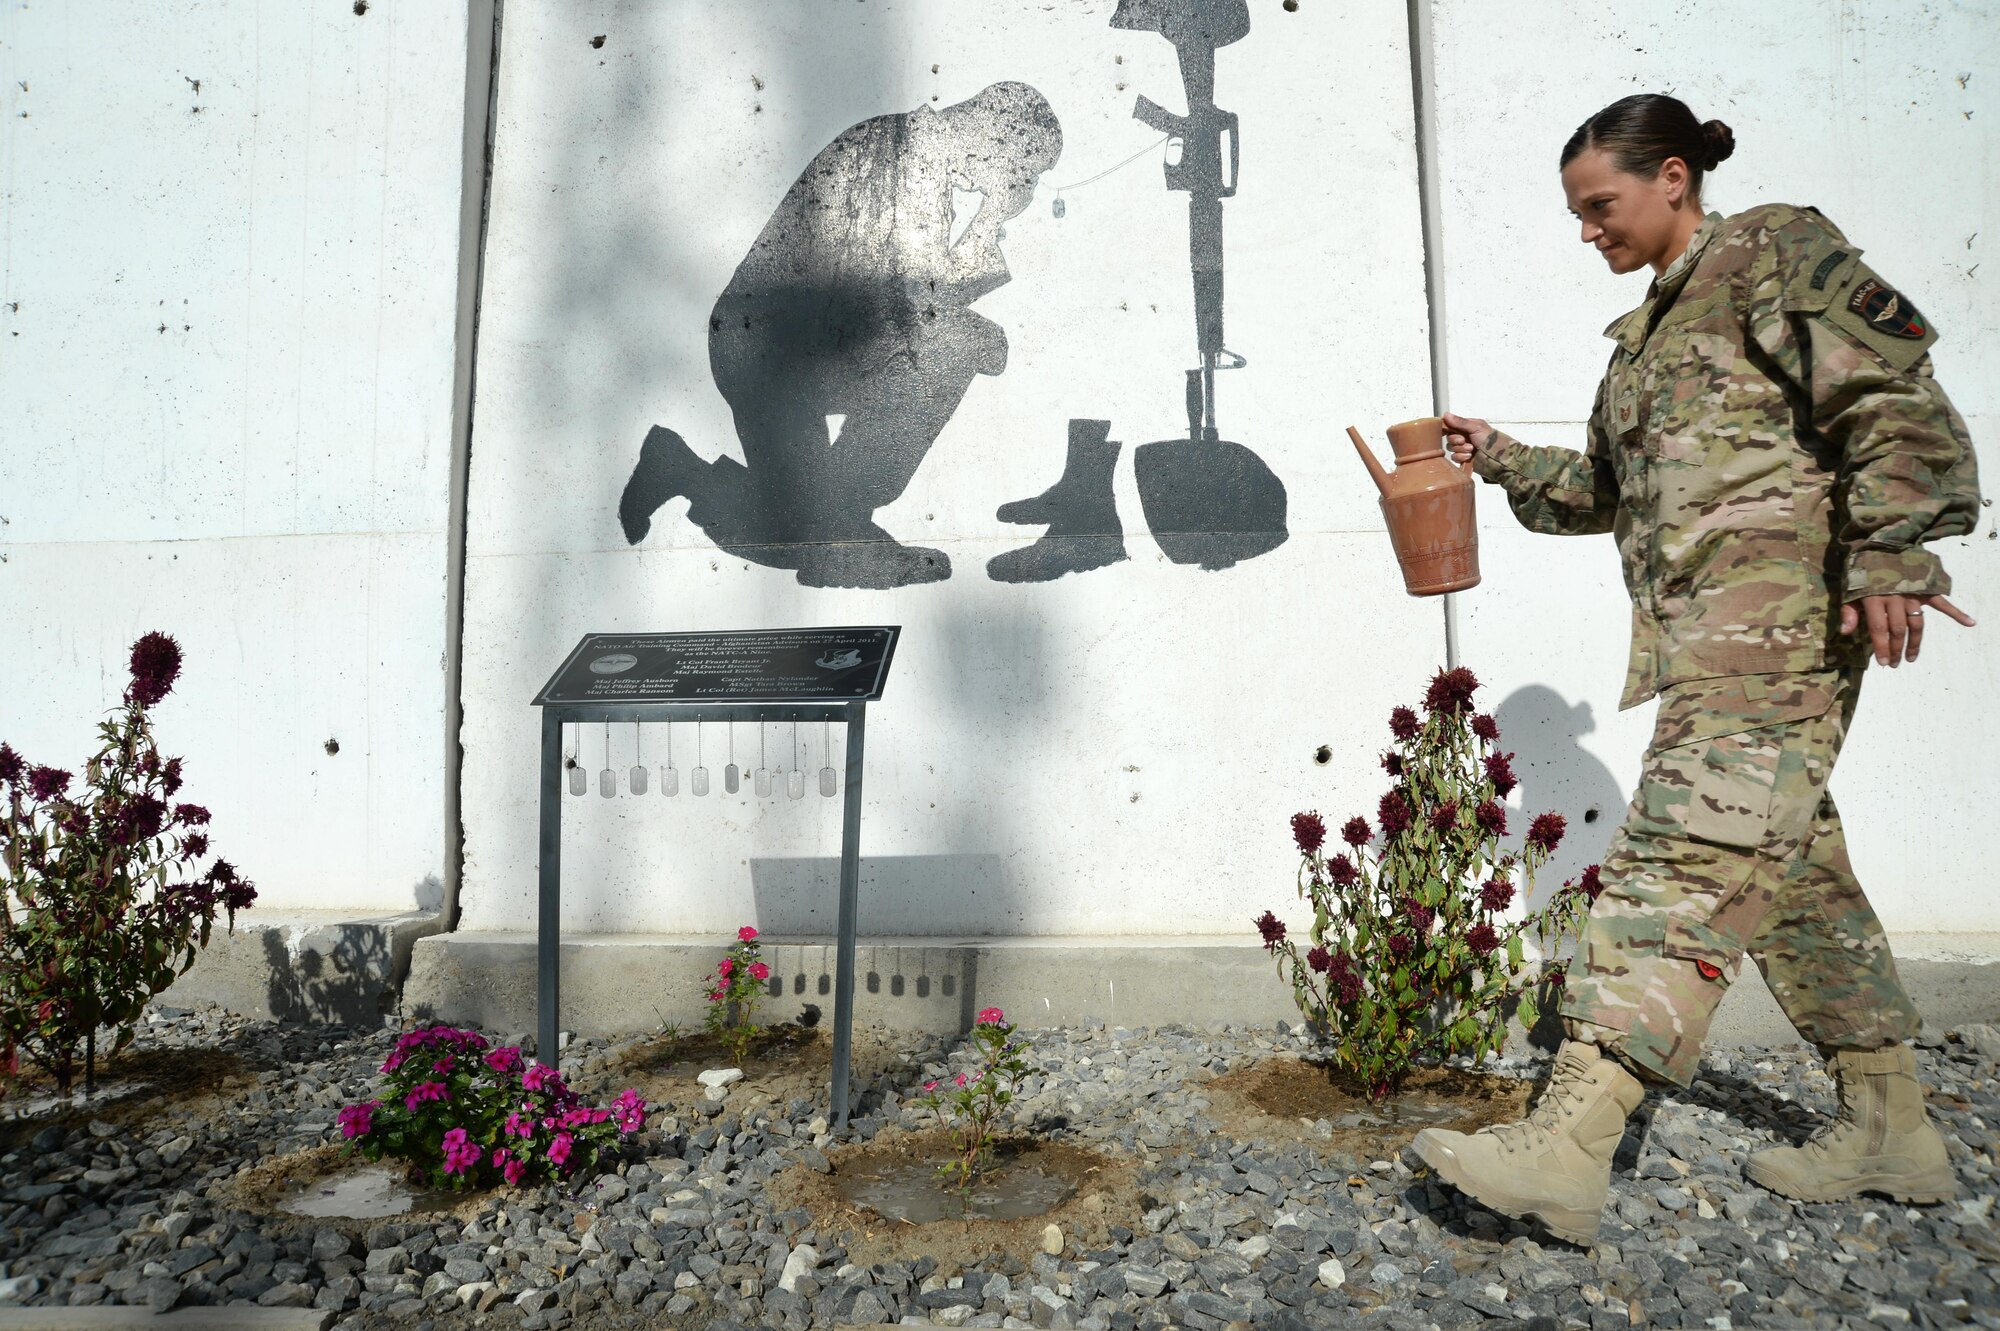 U.S. Air Force Tech. Sgt. Valarie, Train, Advise, Assist Command – Air (TAAC-Air), waters the flowers around the NATO Air Training Command – Afghanistan (NATC-A) Nine Memorial Forward Operating Base Oqab, Afghanistan, Sept. 22, 2015. The 438th Air Expeditionary Advisor Group with funds and donations by the Enlisted Coalition Council built the NATC-A Nine Memorial in April 2013. (U.S. Air Force photo by Staff Sgt. Sandra Welch/released)